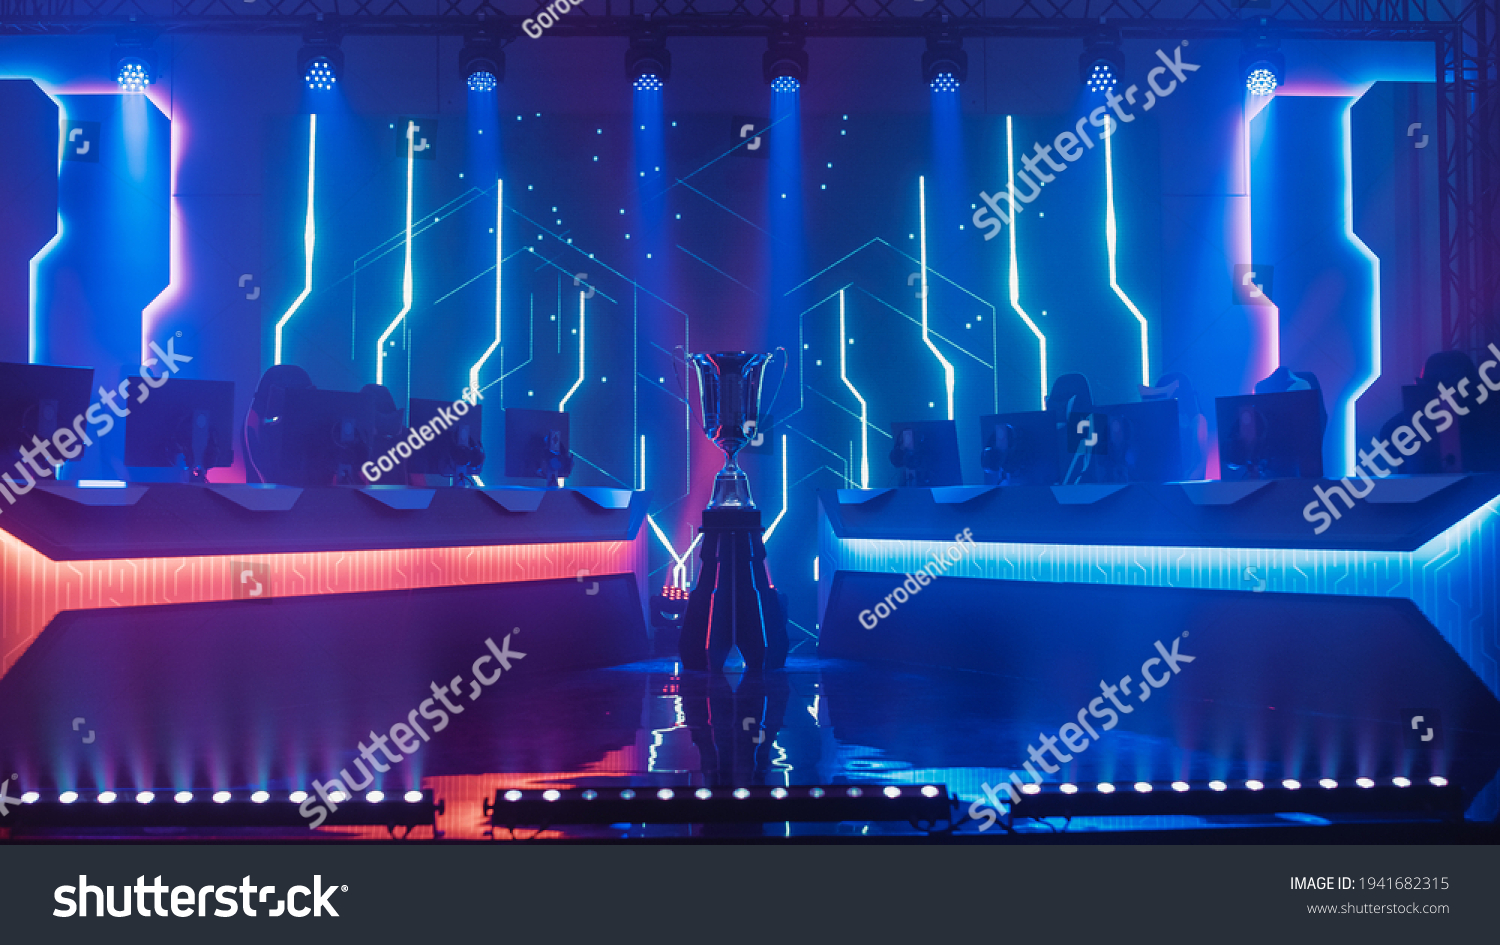 eSports Winner Trophy Standing on a Stage in the Middle of the Computer Video Games Championship Arena. Two Rows of PC for Competing Teams. Stylish Neon Lights with Cool Design. #1941682315